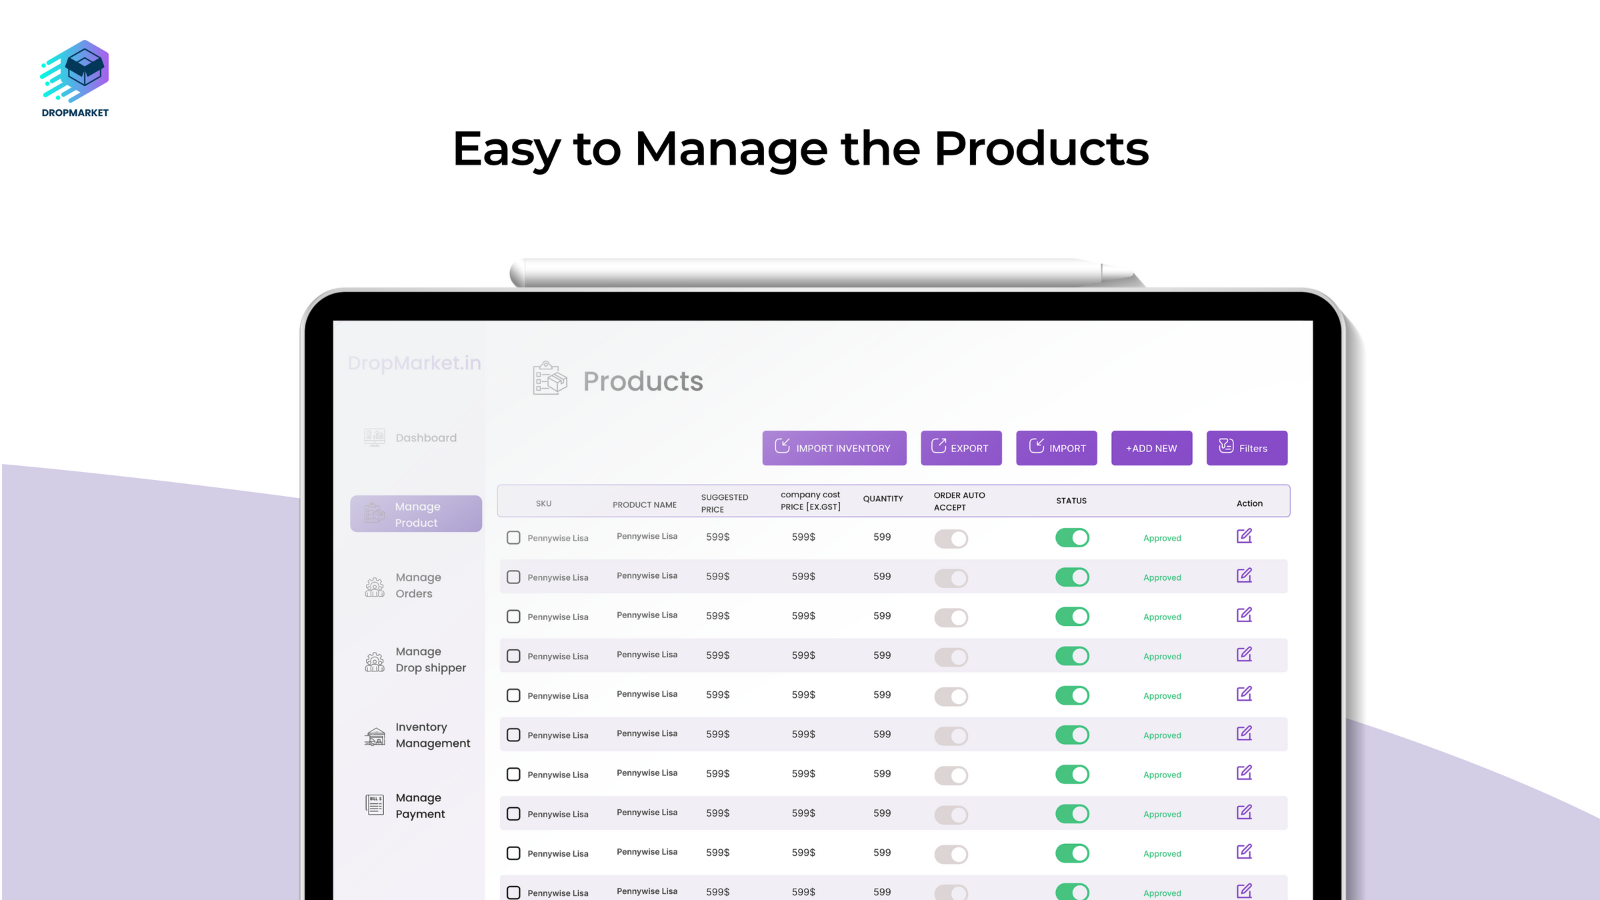 Manage Products